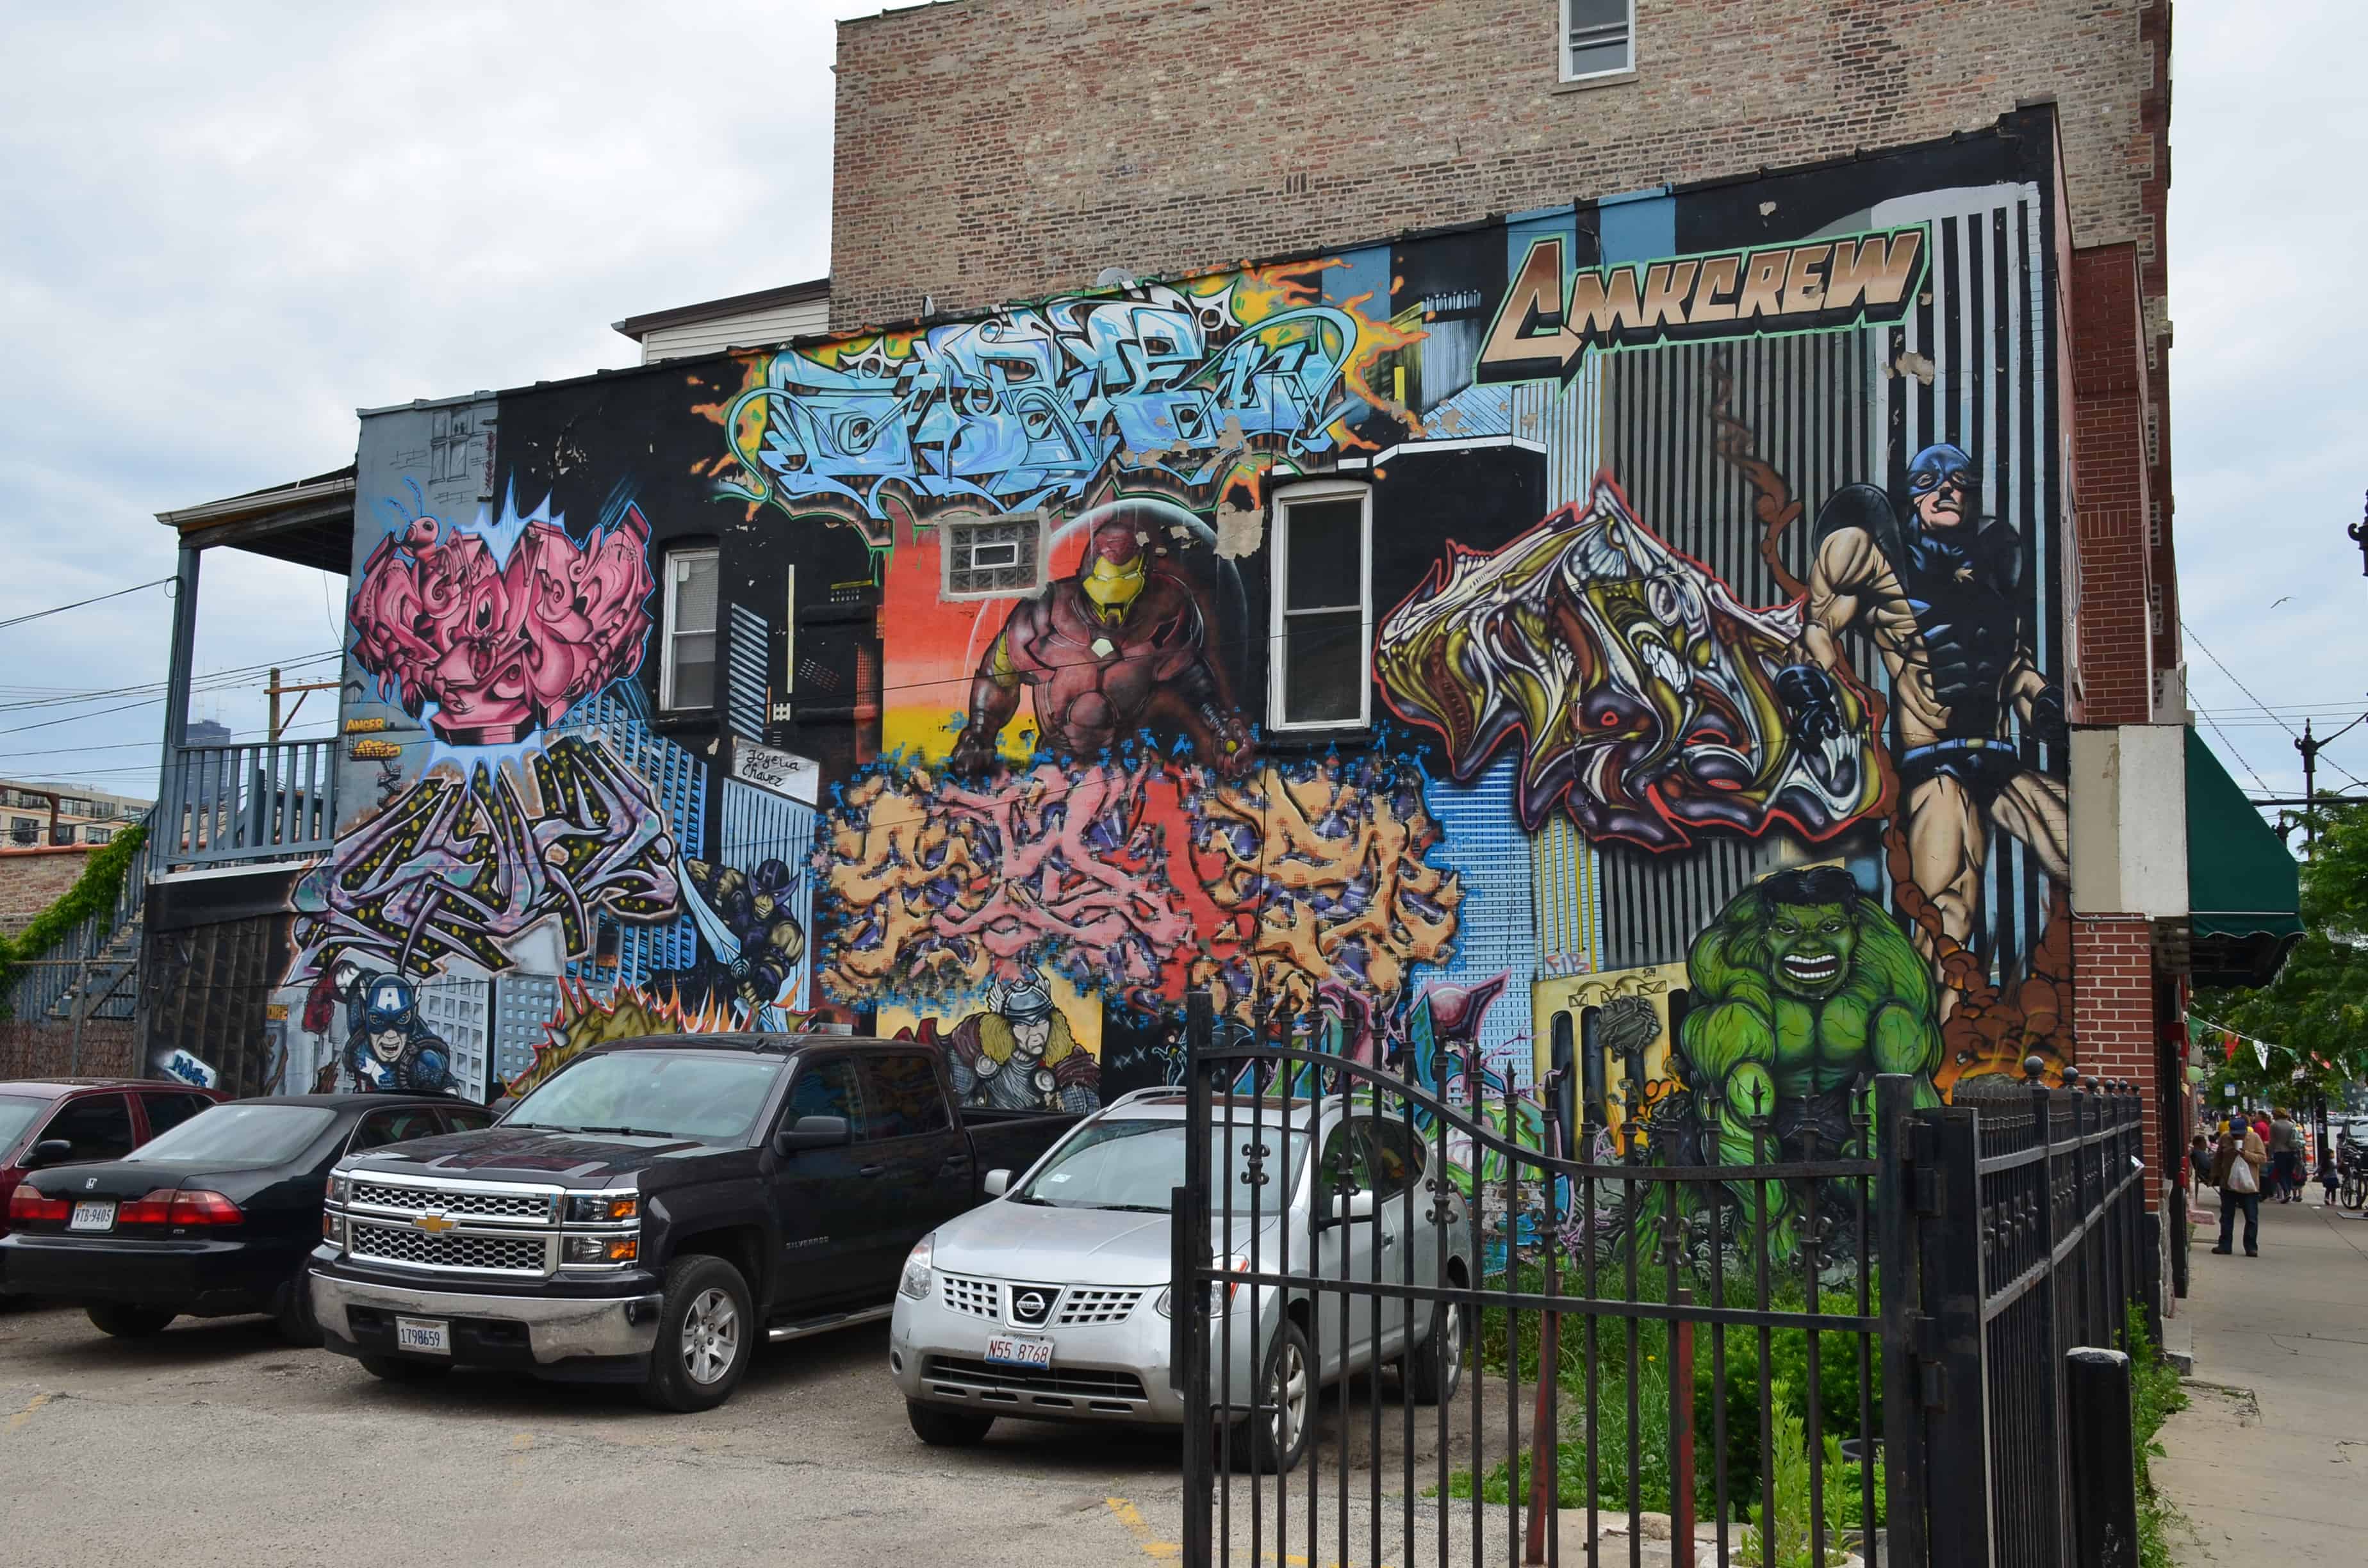 18th and Bishop in Pilsen, Chicago, Illinois